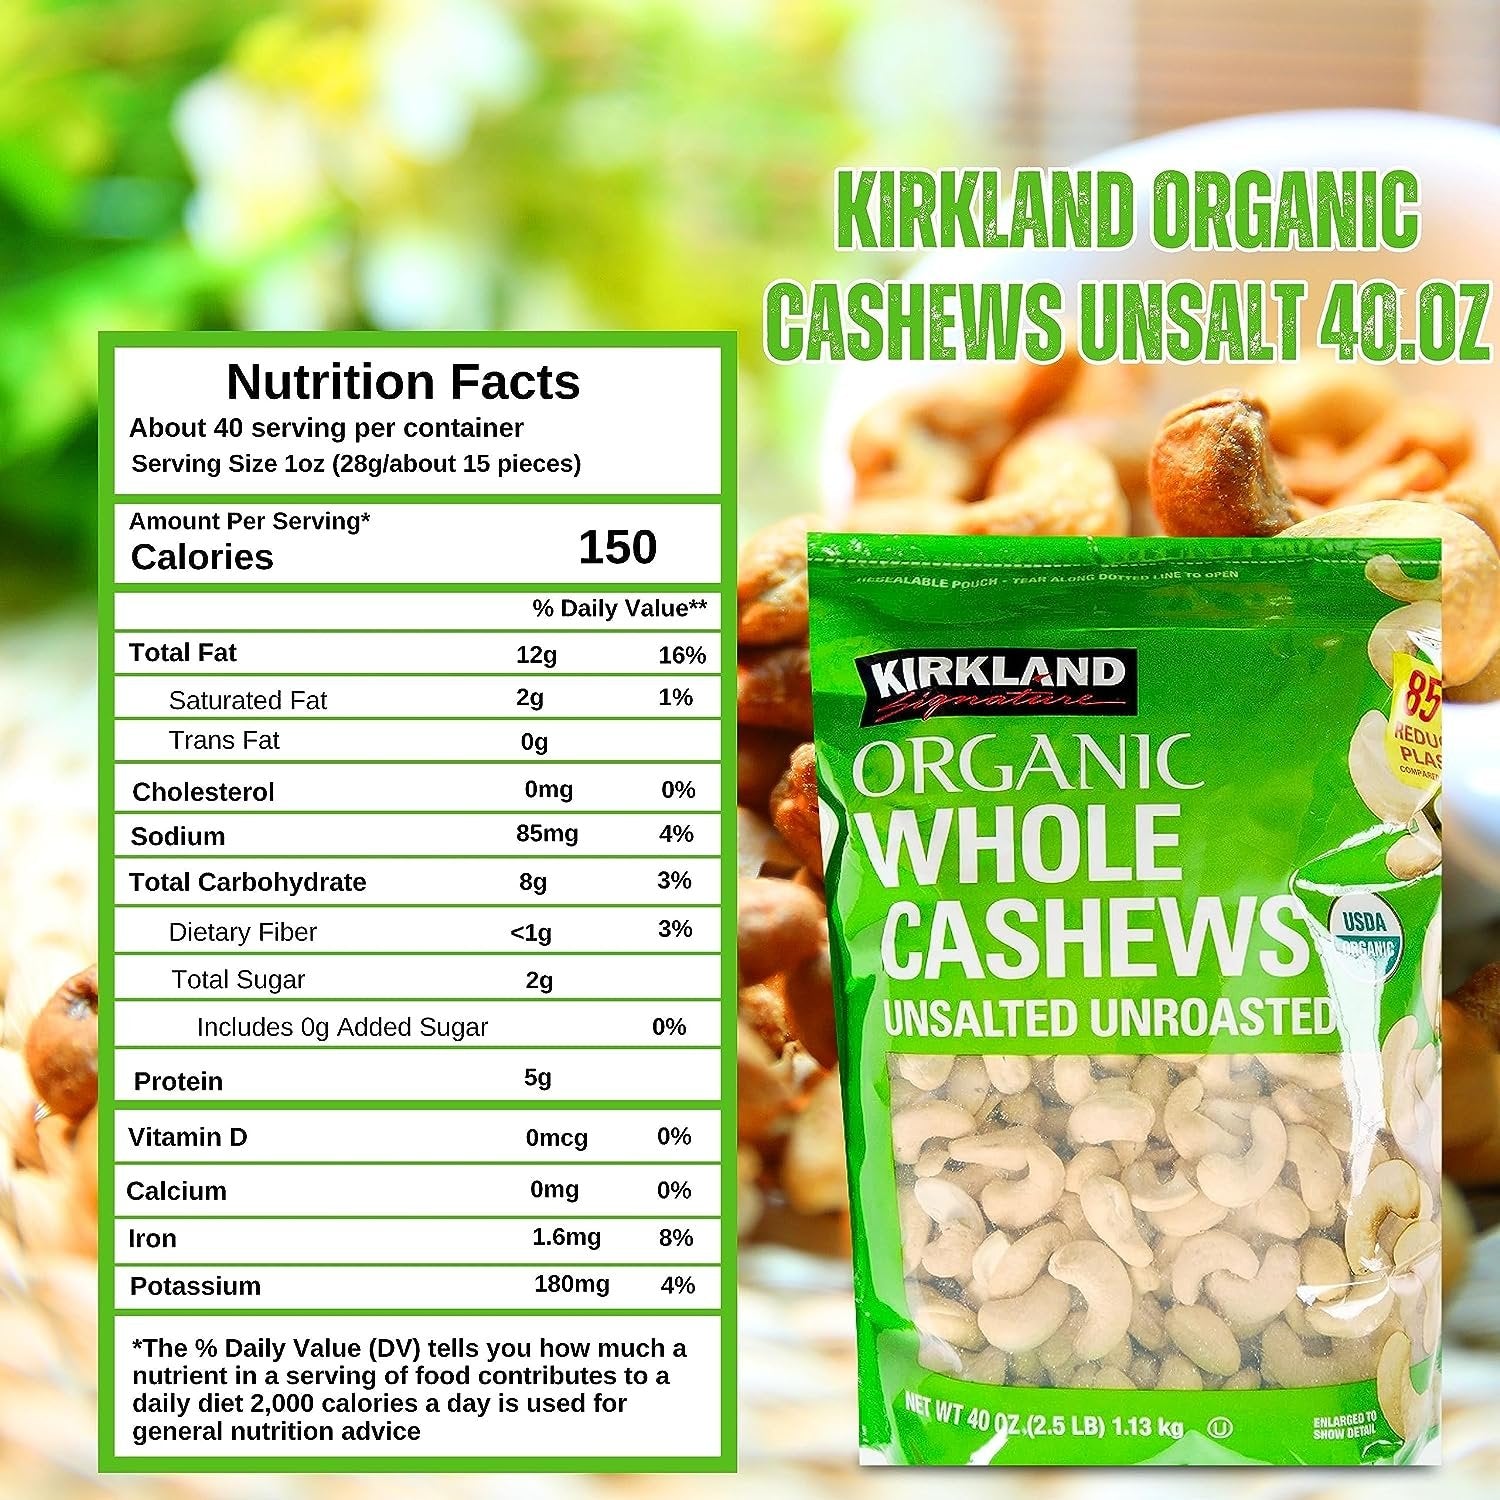 Kirkland Signature Organic Whole Cashews Unsalted Unroasted - Perfect for Snacking, Cooking, and Gifting - 40 oz with Multi-Purpose Keychain